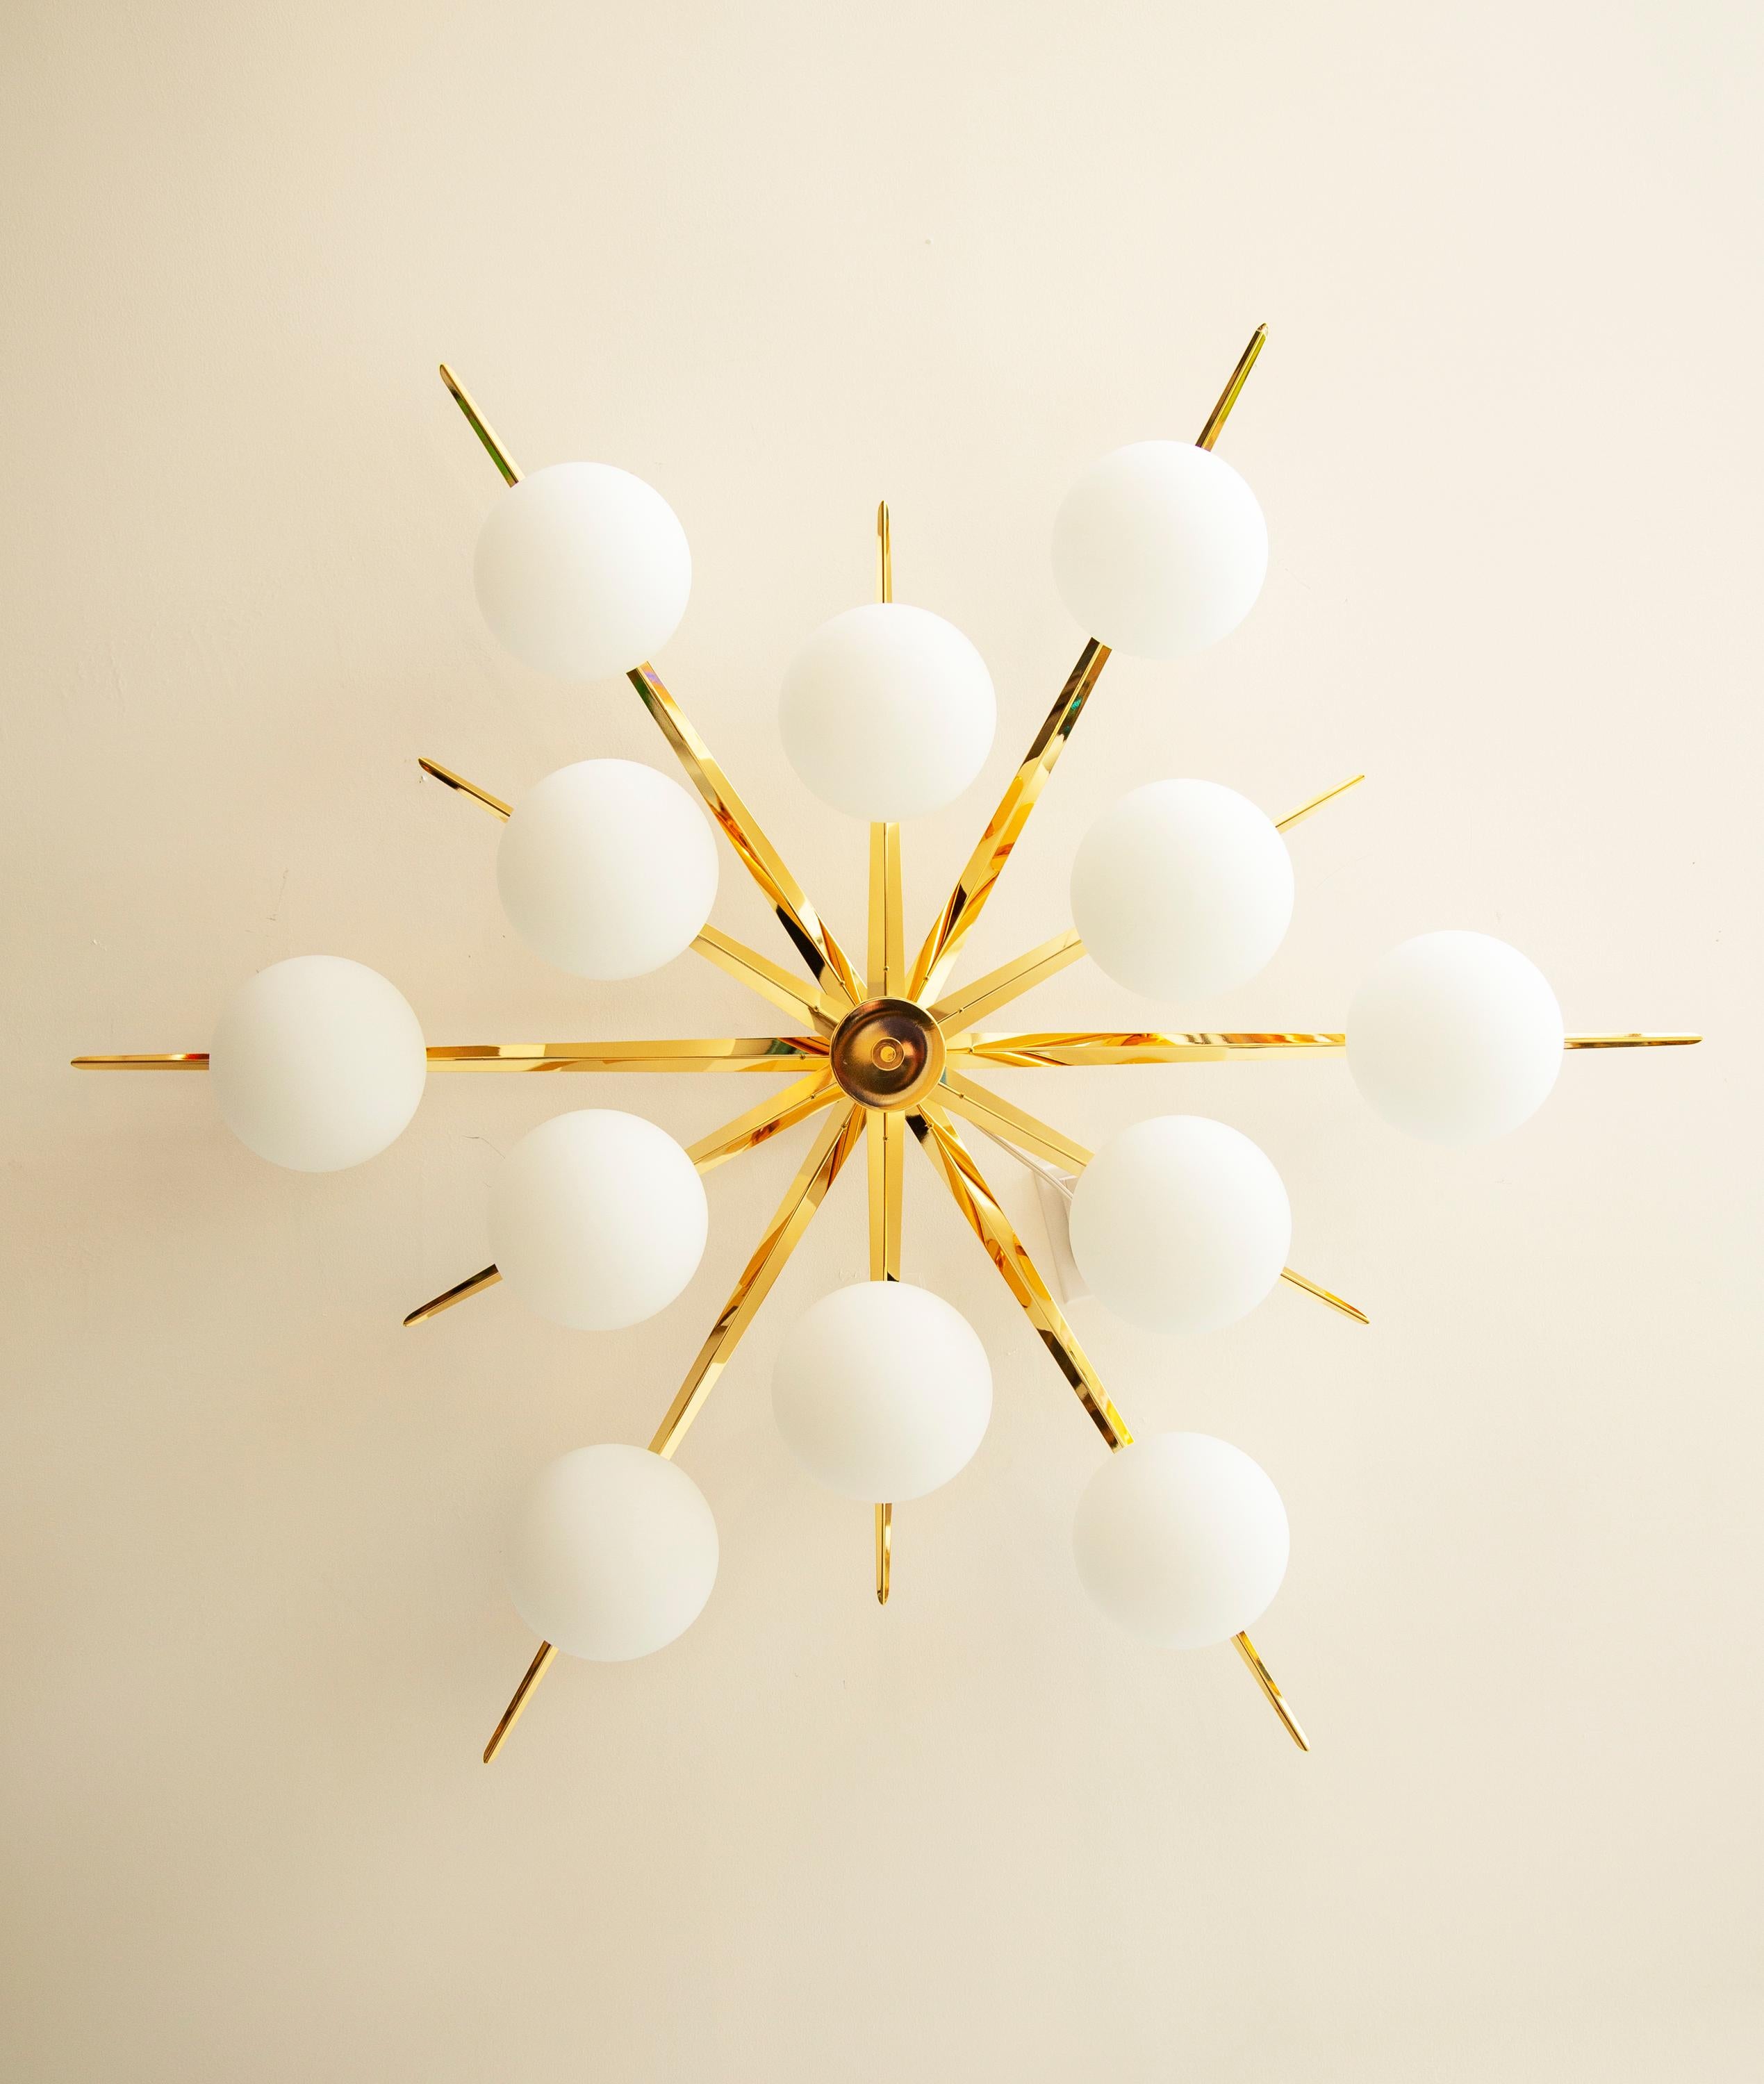 Contemporary flush mount starburst ceiling light in polished brass and matte glass
Features 12 oblong shape matte globes
Stunning design from all angles
Available to view in situ at our showroom in Miami.
Fixture should be checked by a